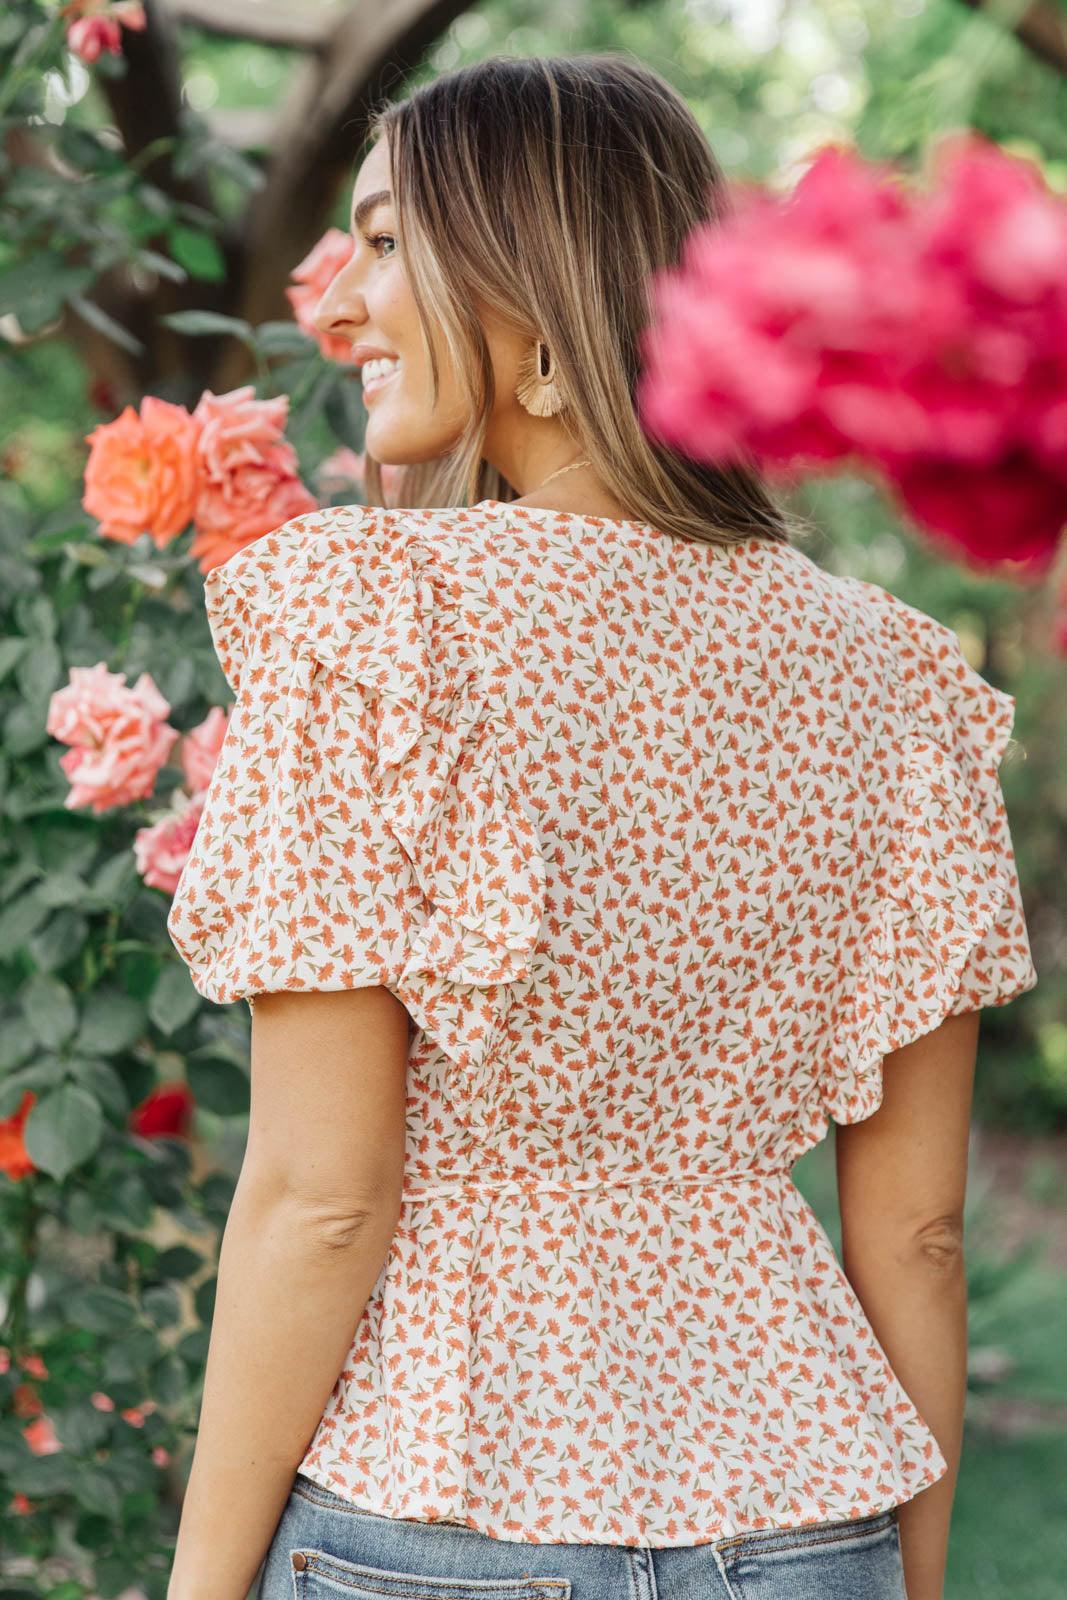 Folksong Floral Top in Coral - The Fiery Jasmine